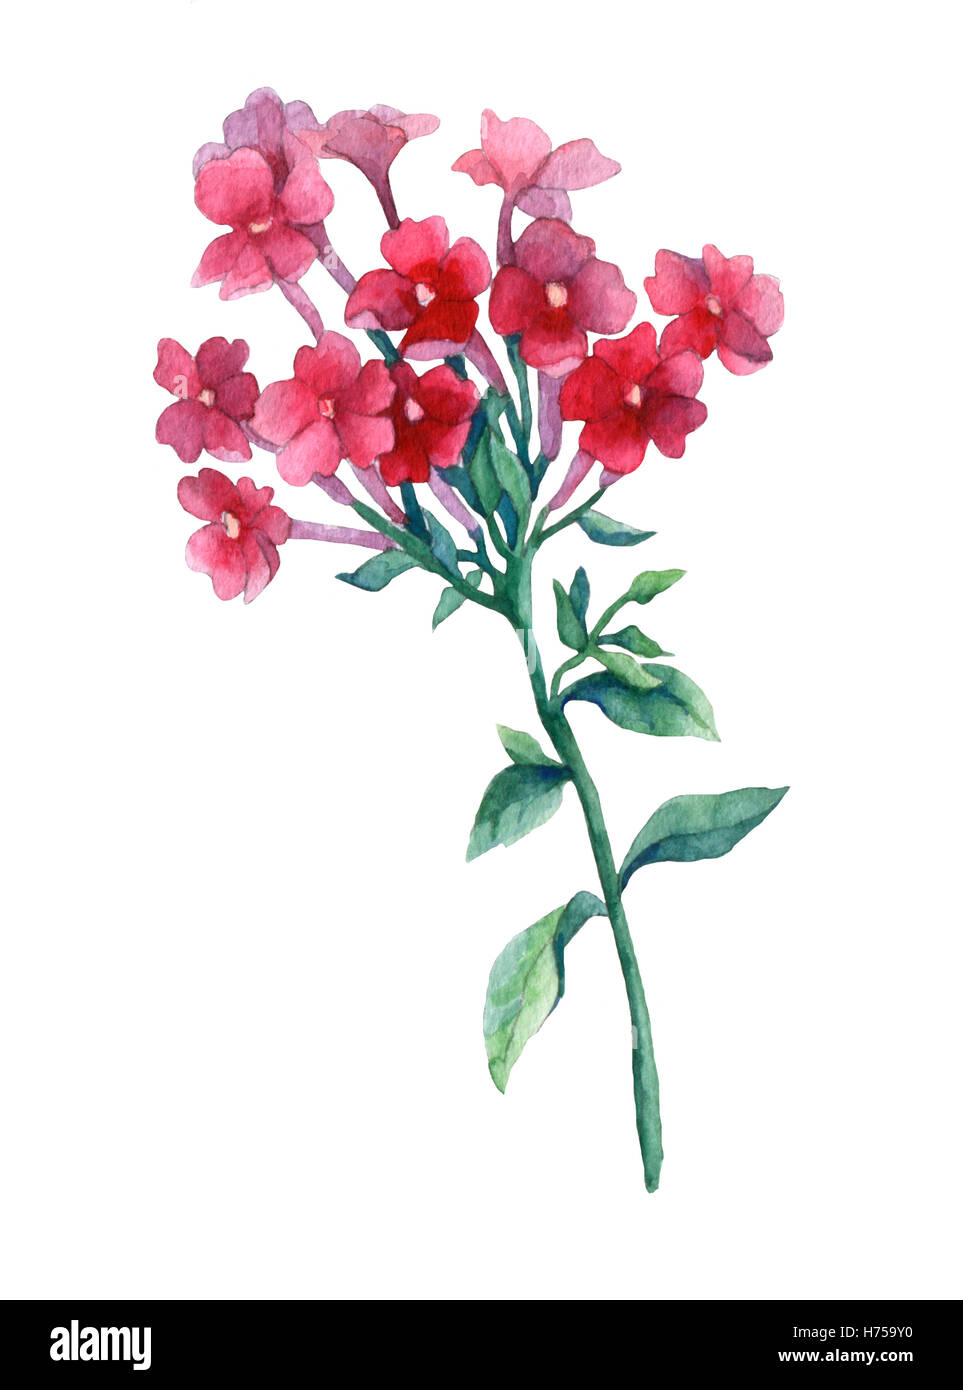 Pink phlox paniculata. A branch of Garden phlox flowers. Watercolor hand painting illustration on isolate white background. Stock Photo